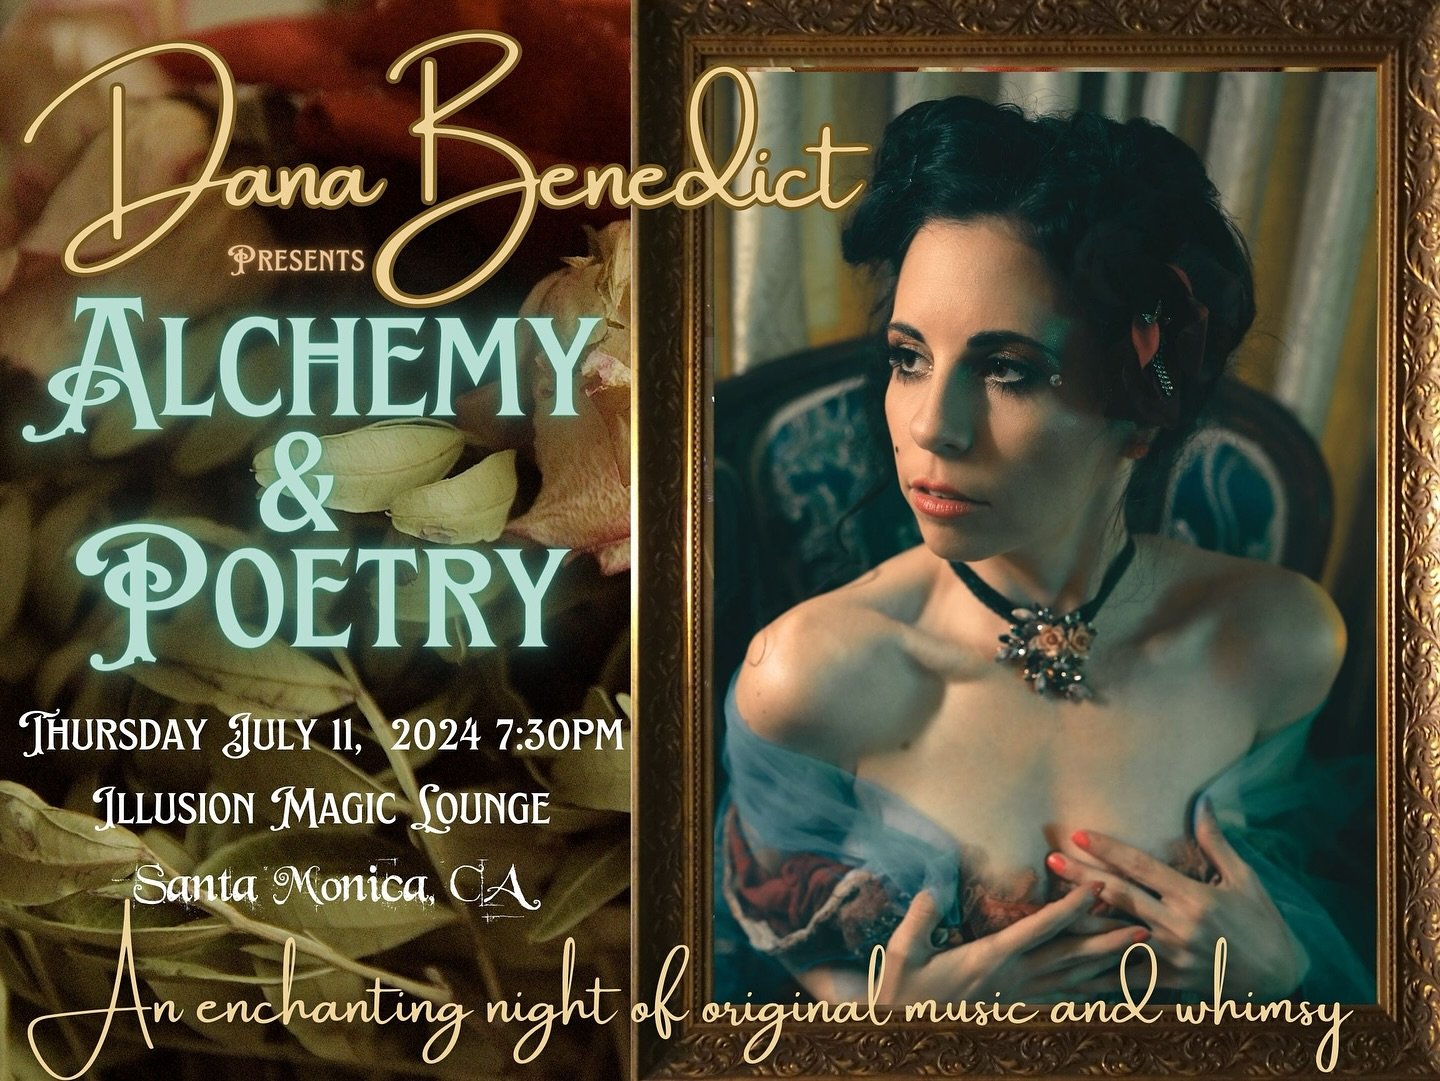 🎶🗝️✨ ANNOUNCING MY DREAM SHOW IS COMING TO FRUITION ✨🧚🏻💫

A musical journey through realms of whimsy and folklore. 
Dana Benedict&rsquo;s ethereal voice will lead the way through haunting melodies leaving you wanting more of her siren&rsquo;s ca